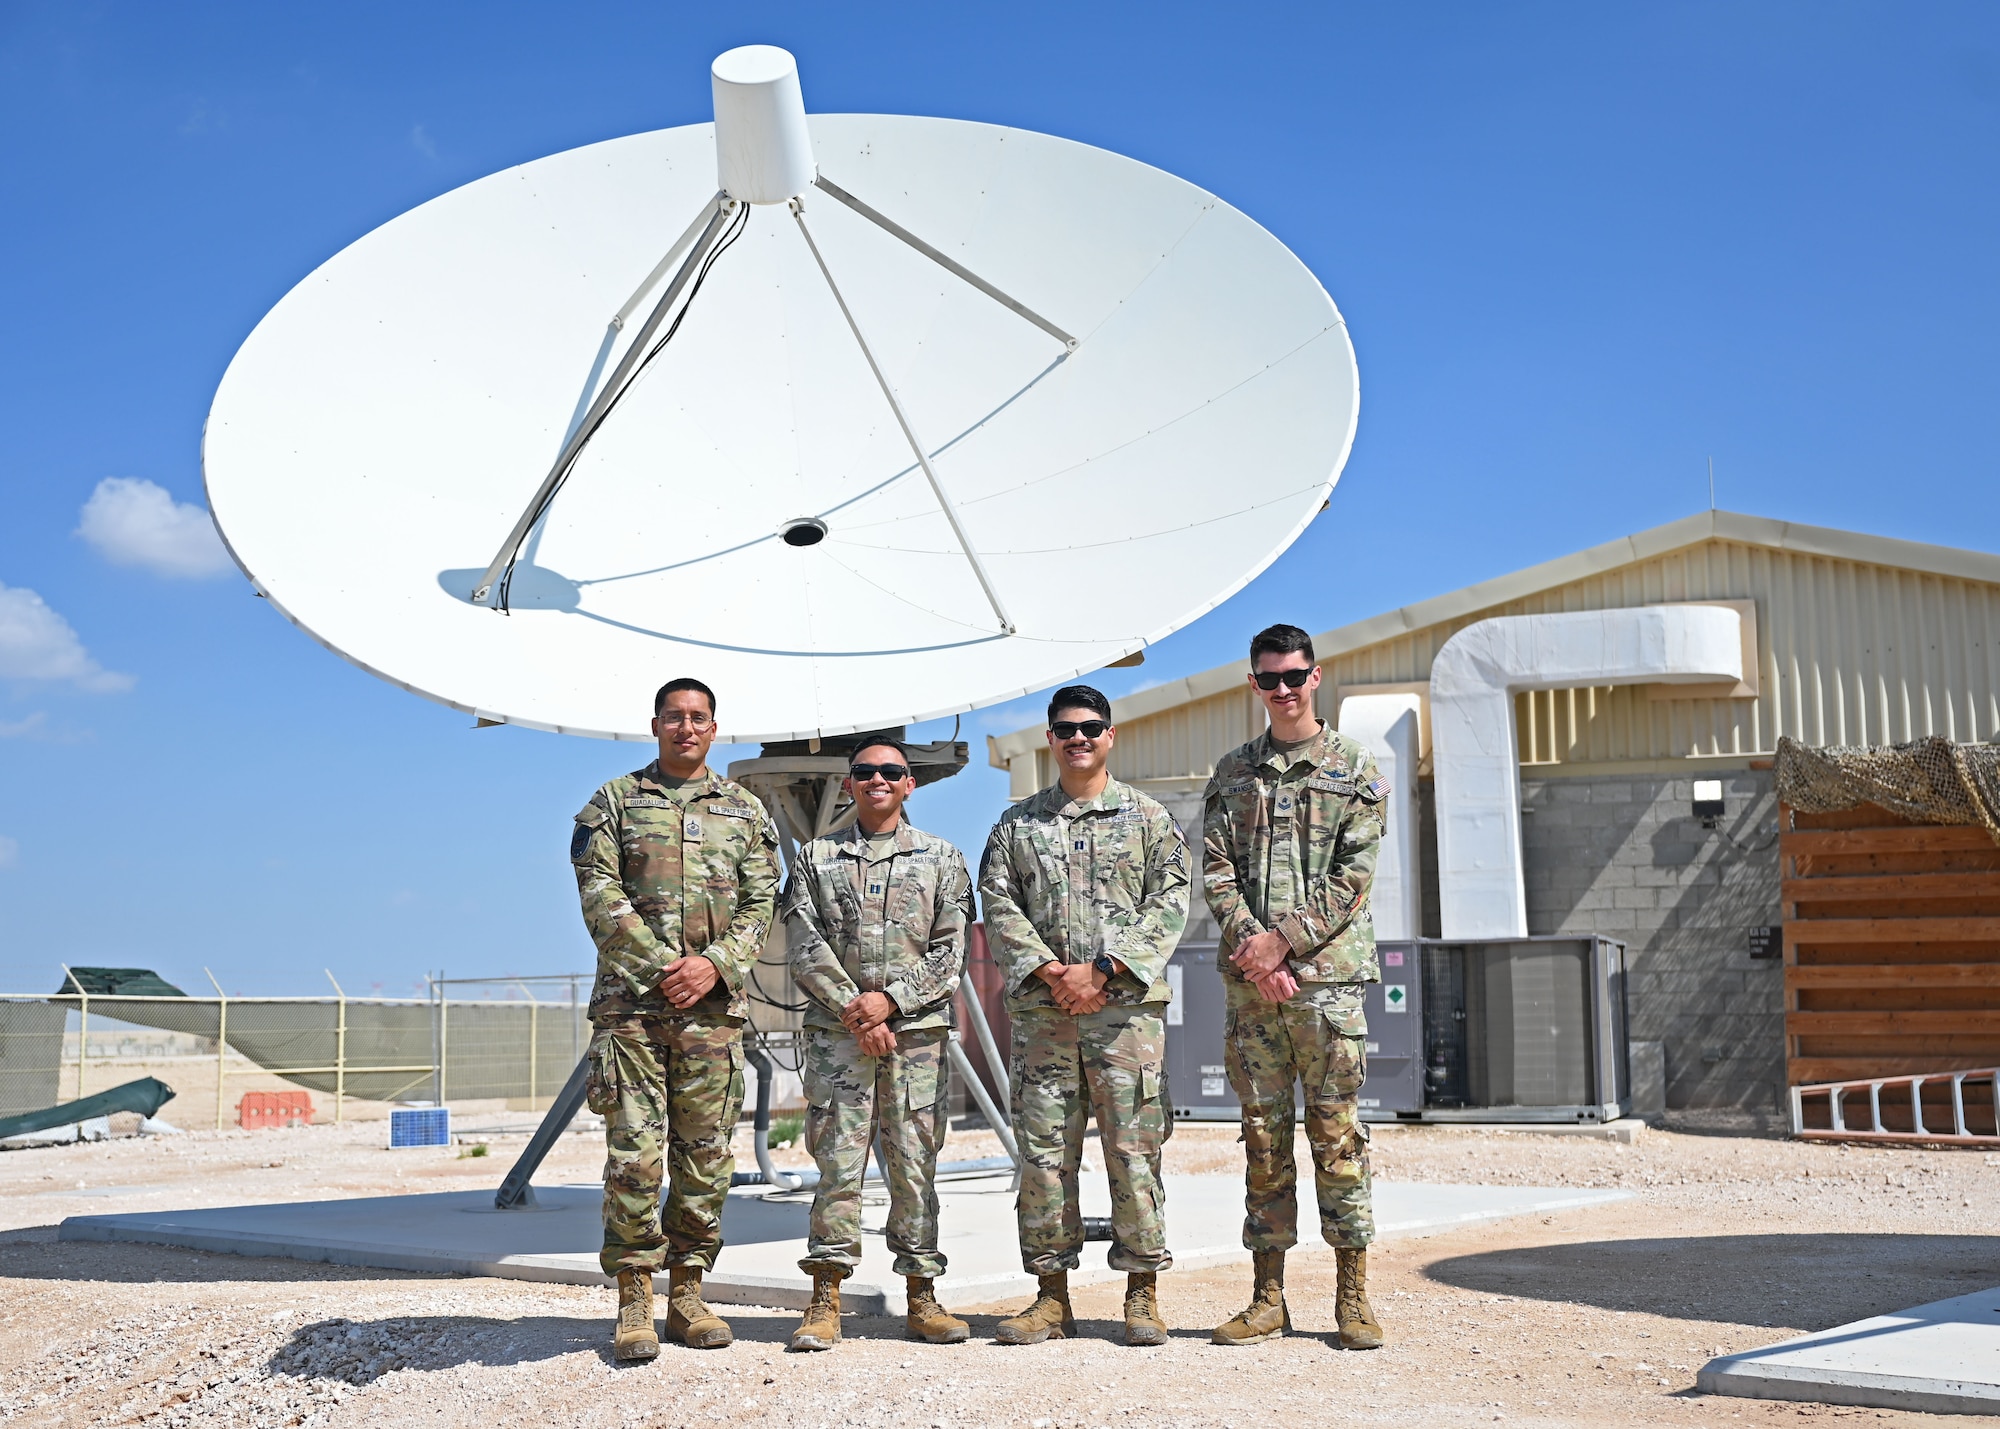 U.S. Space Force members assigned to the 5th Space Warning Squadron Detachment 2 gather for a group photo in front of a ground antenna at an undisclosed location in the U.S Central Command area of responsibility, Oct. 27, 2023. Members stationed as part of Detachment 2 are constantly working and training to ensure they uphold the safety of the service members deployed to these geographic combatant commands by ensuring timely reaction to incoming threats. (U.S. Air Force photo by Senior Airman Sarah Williams)